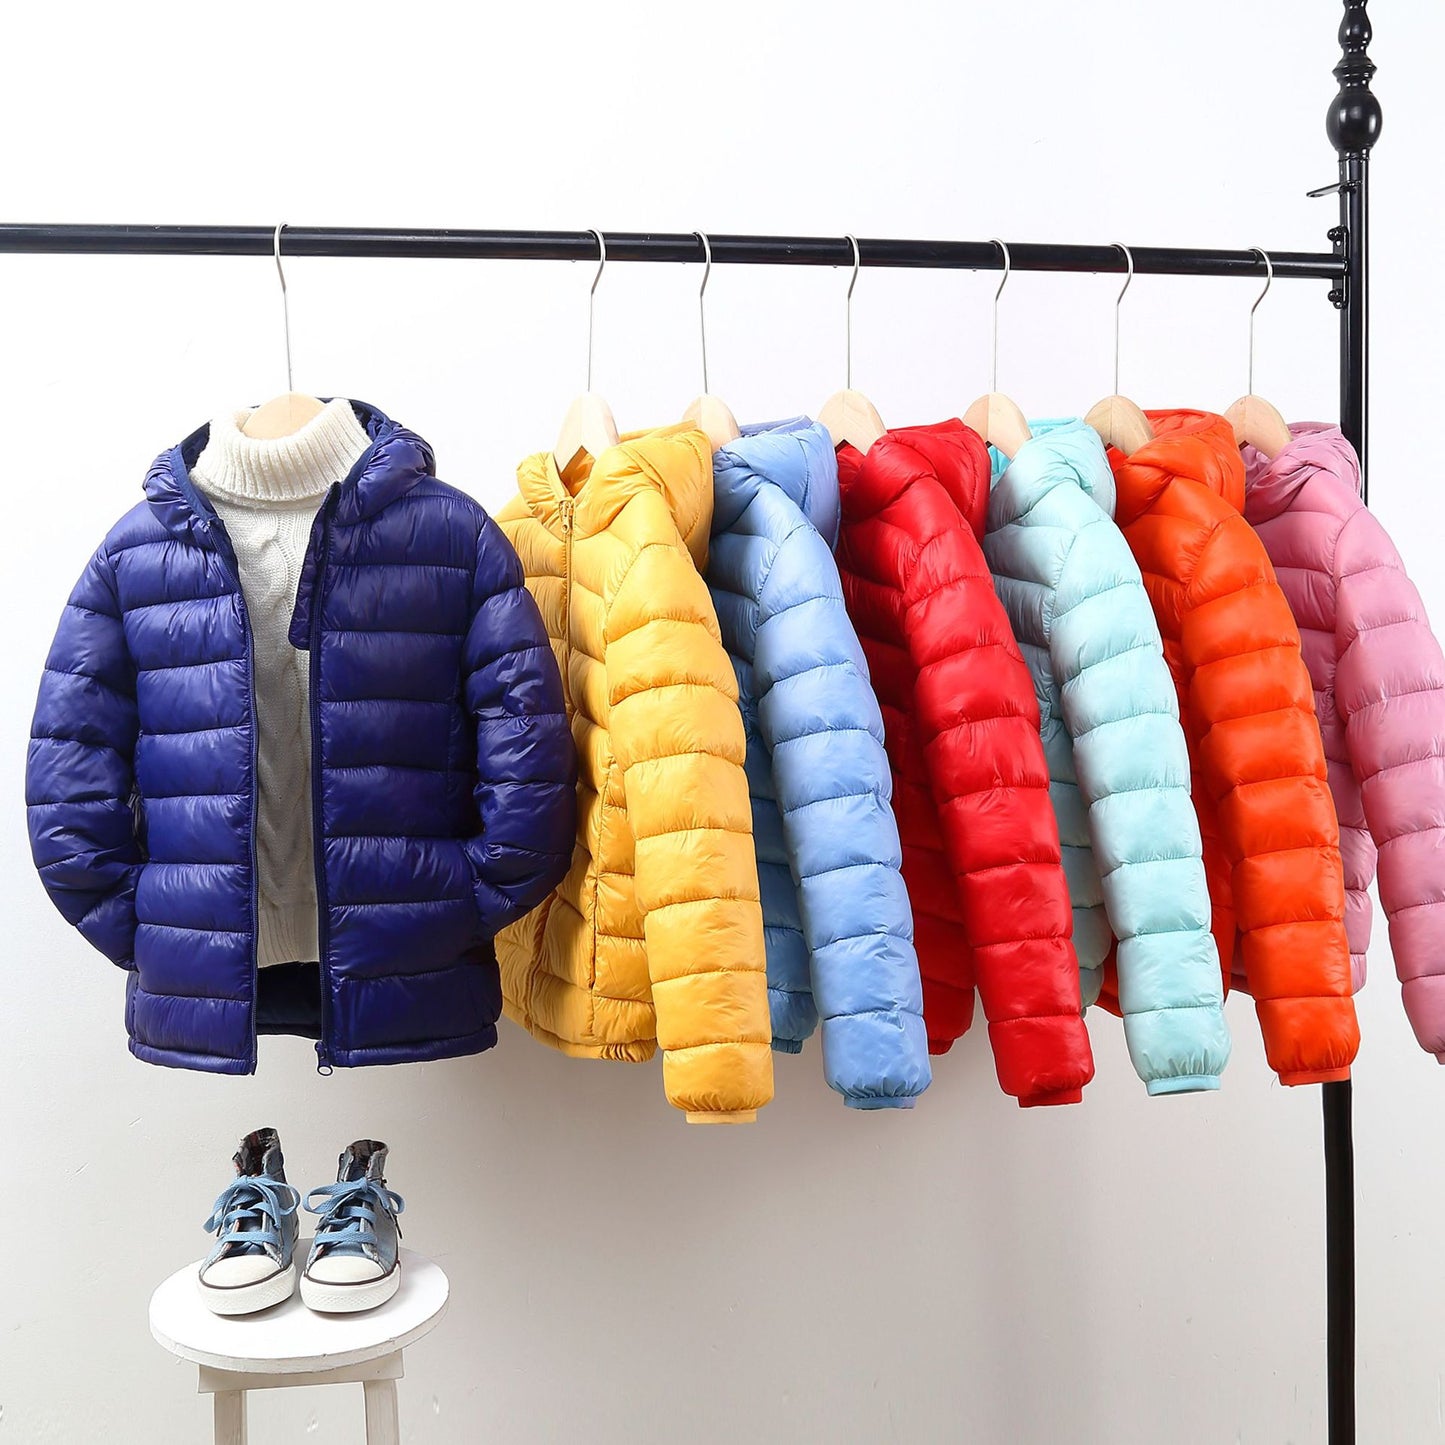 2-14 Years Autumn Winter Kids Down Jackets For Girls Children Clothes Warm Down Coats For Boys Toddler Girls Outerwear Clothes